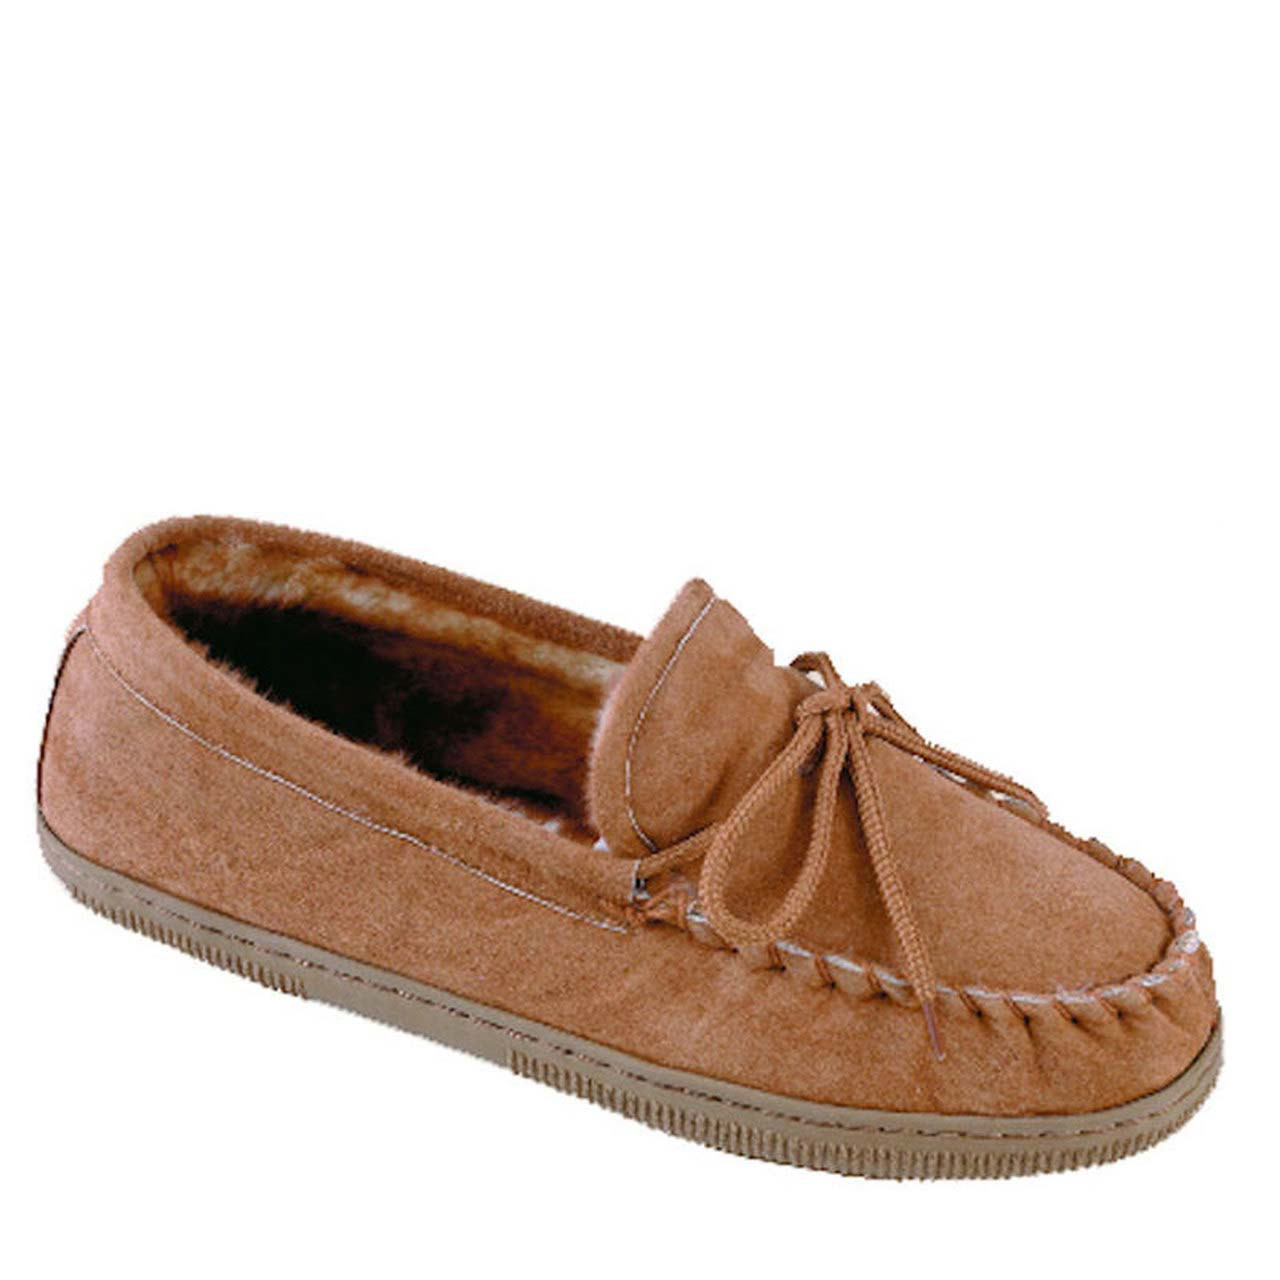 LINED MOCCASIN Chestnut Slippers 